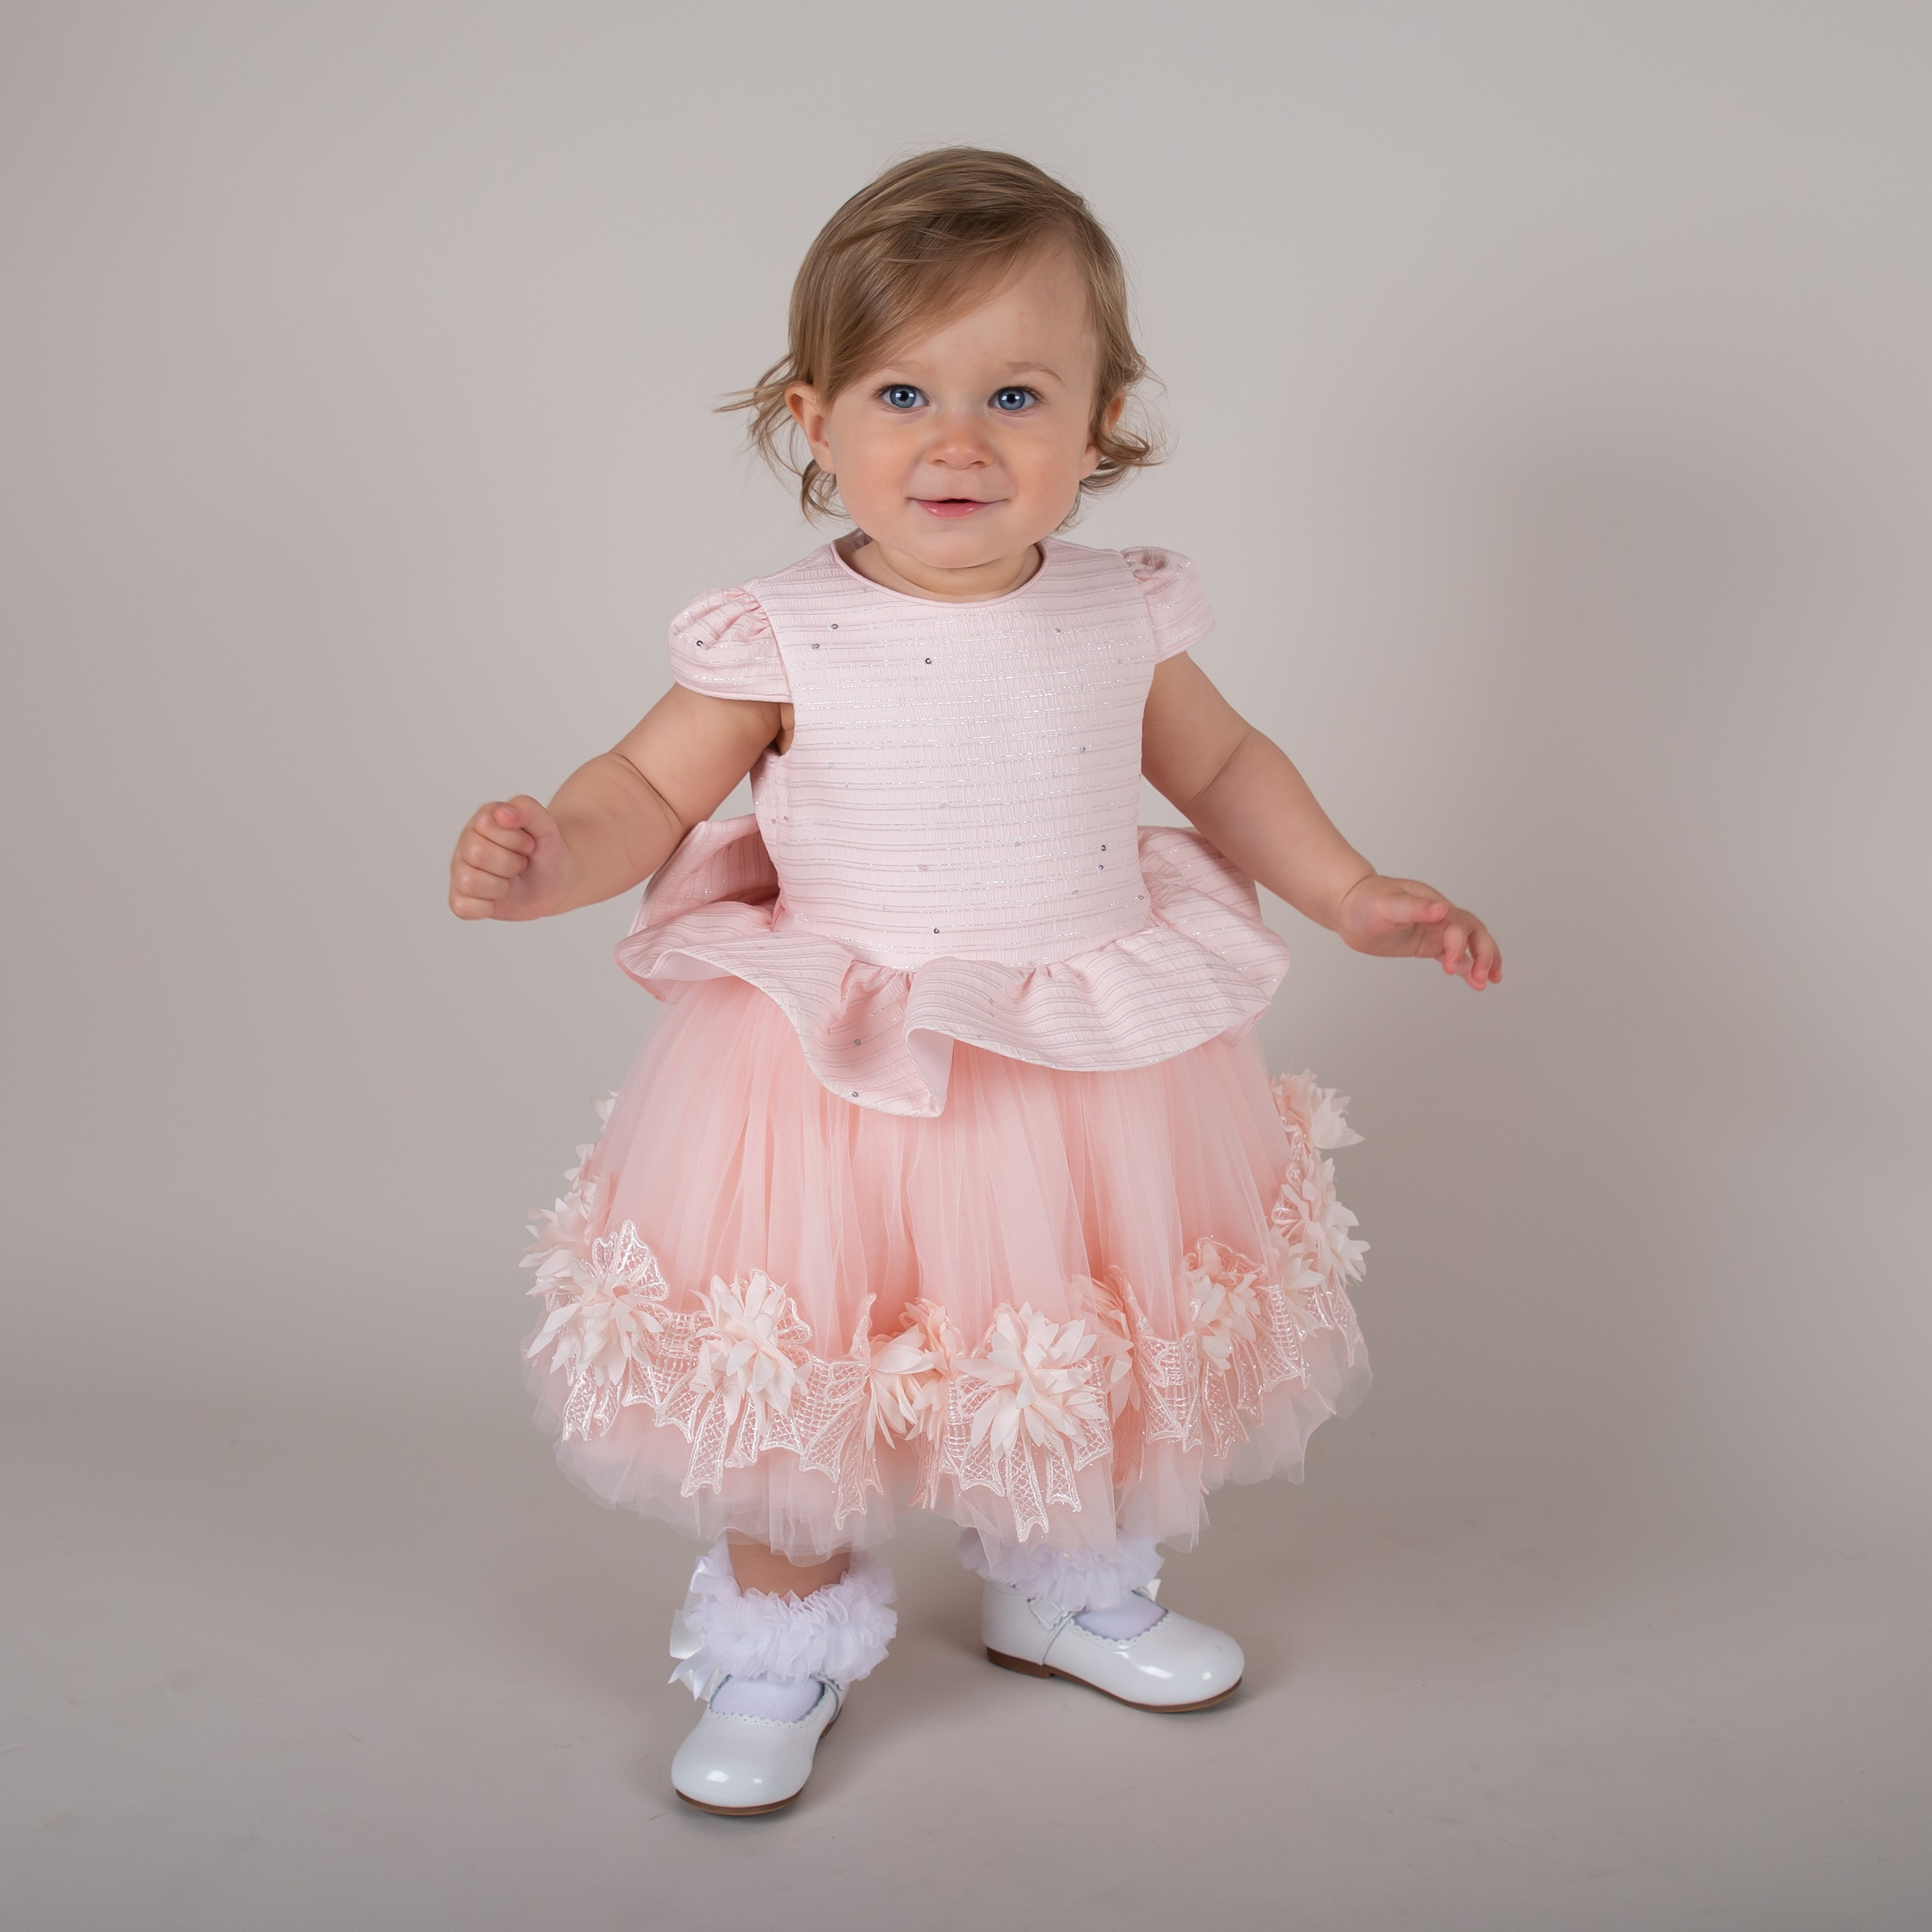 Buy pink tulle dress baby> OFF-52%